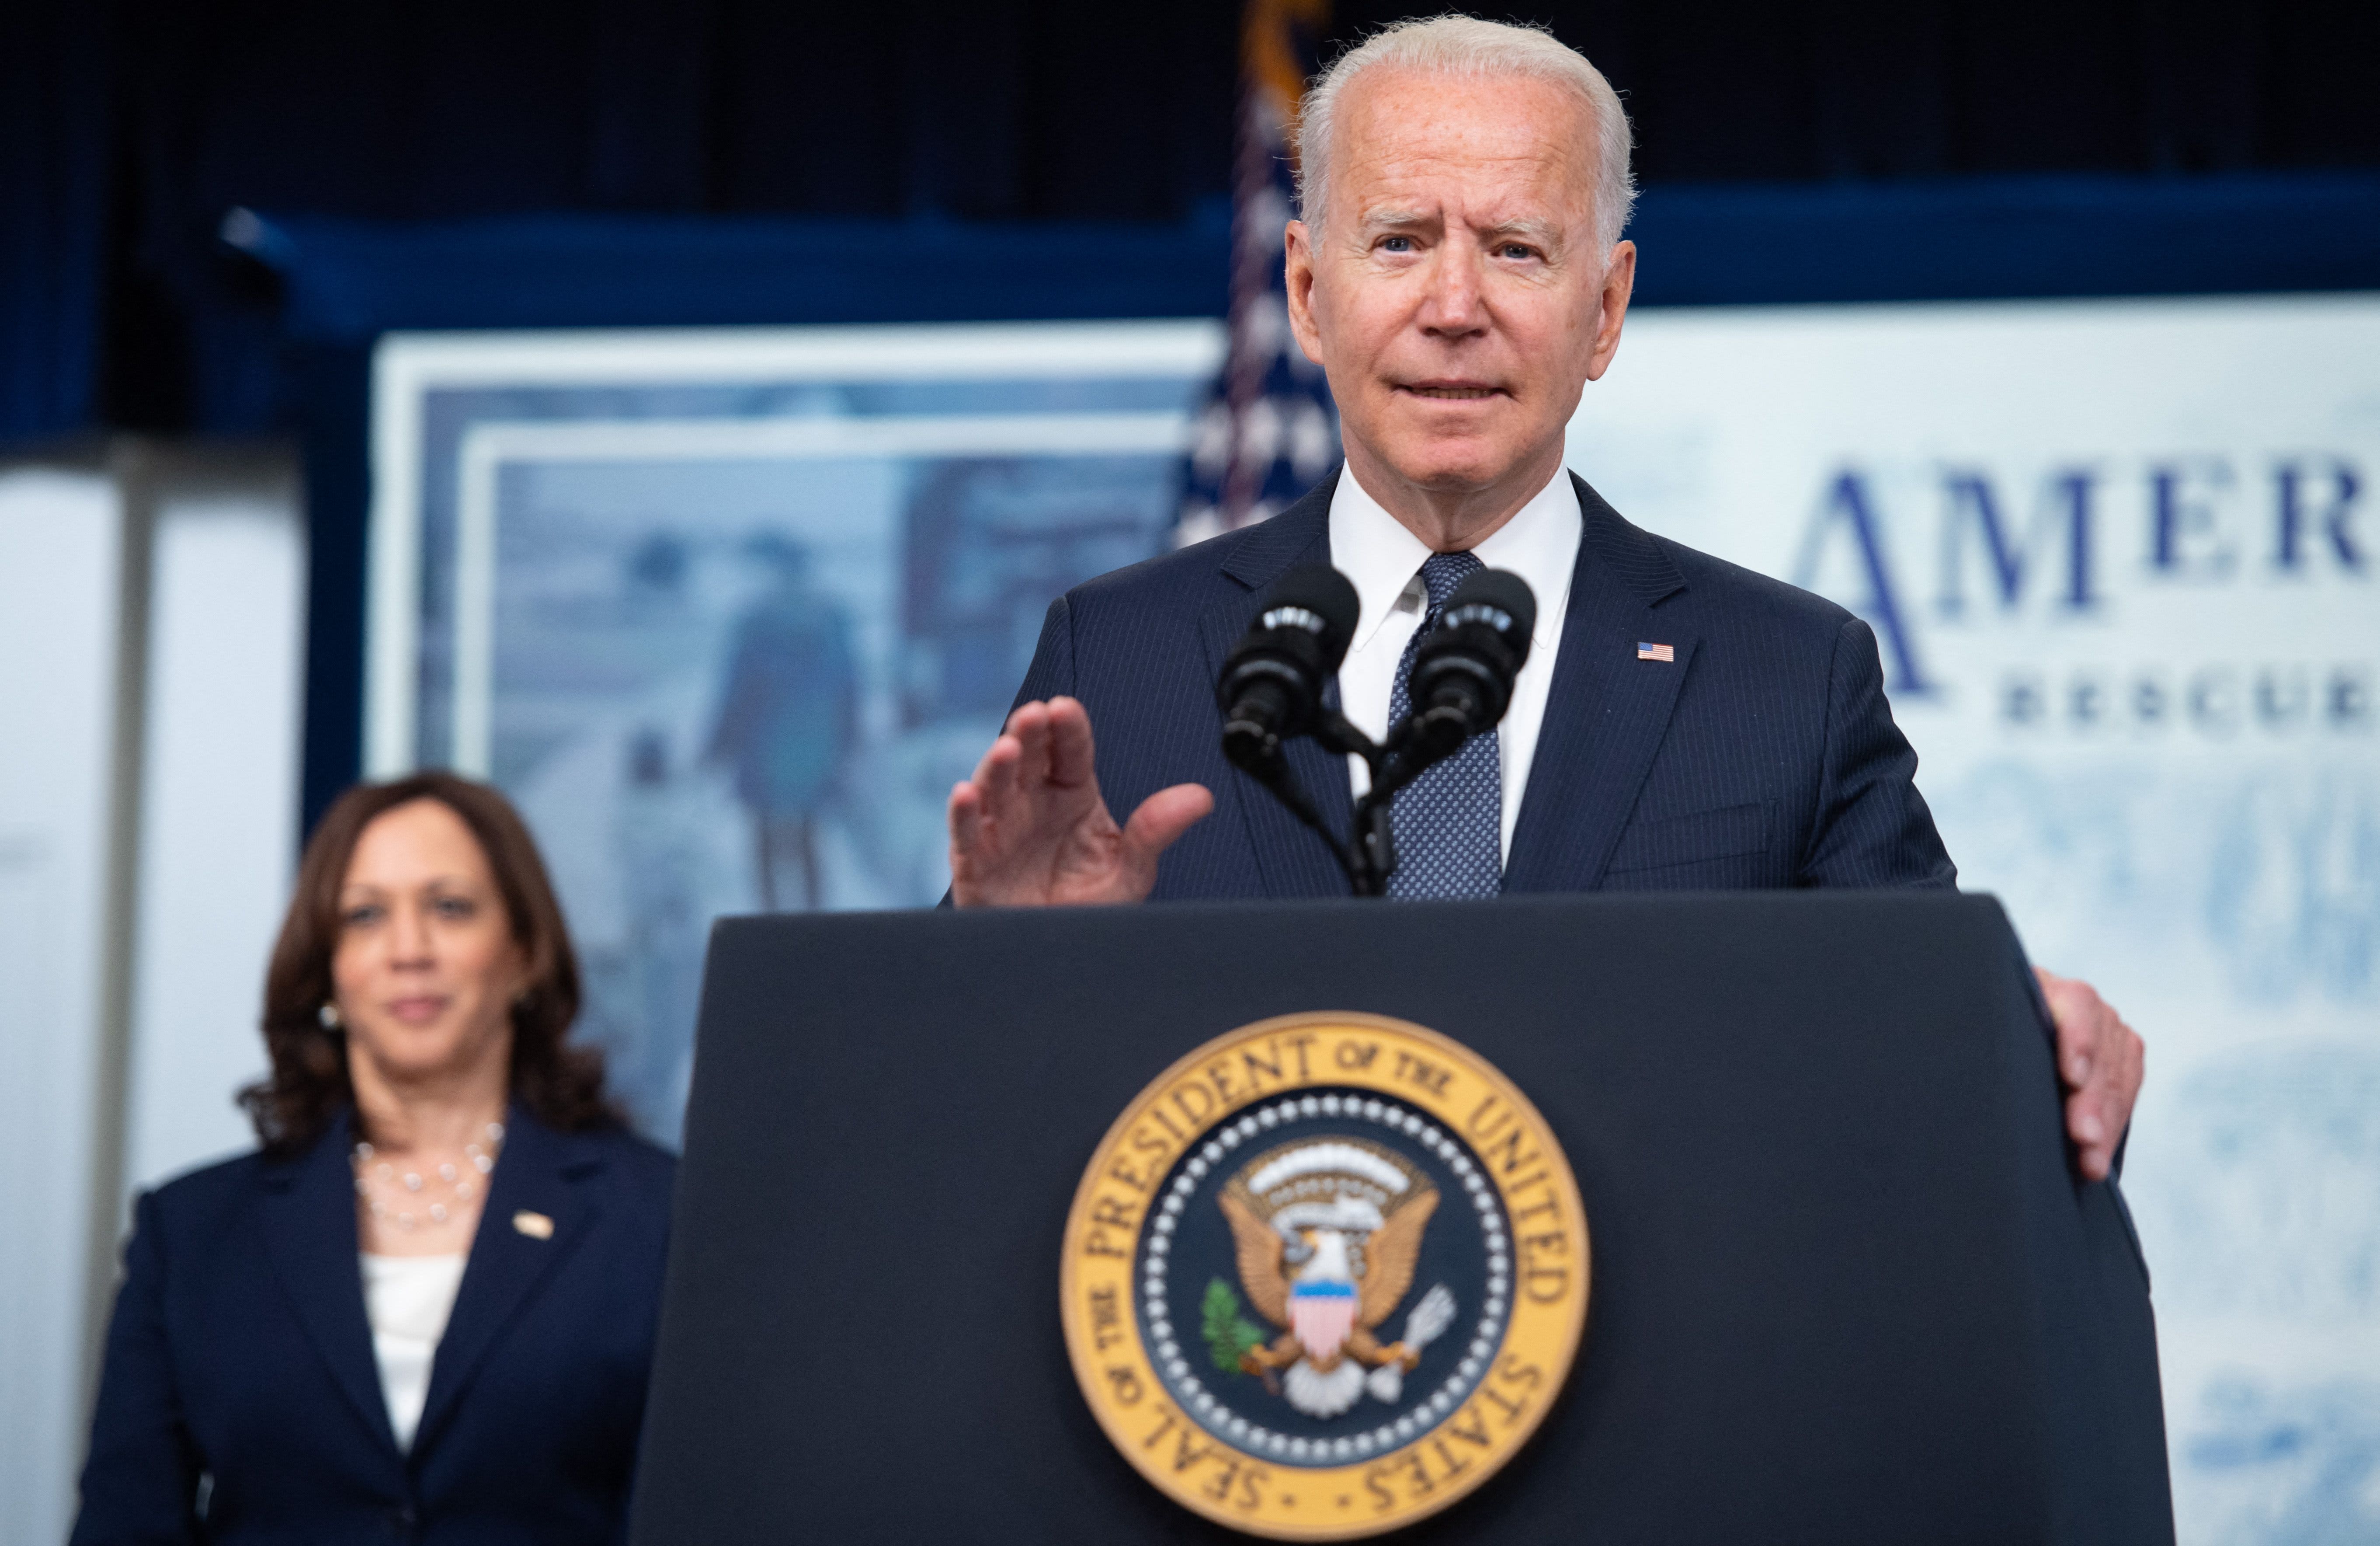 Biden calls on Cuomo to resign after bombshell sexual harassment report